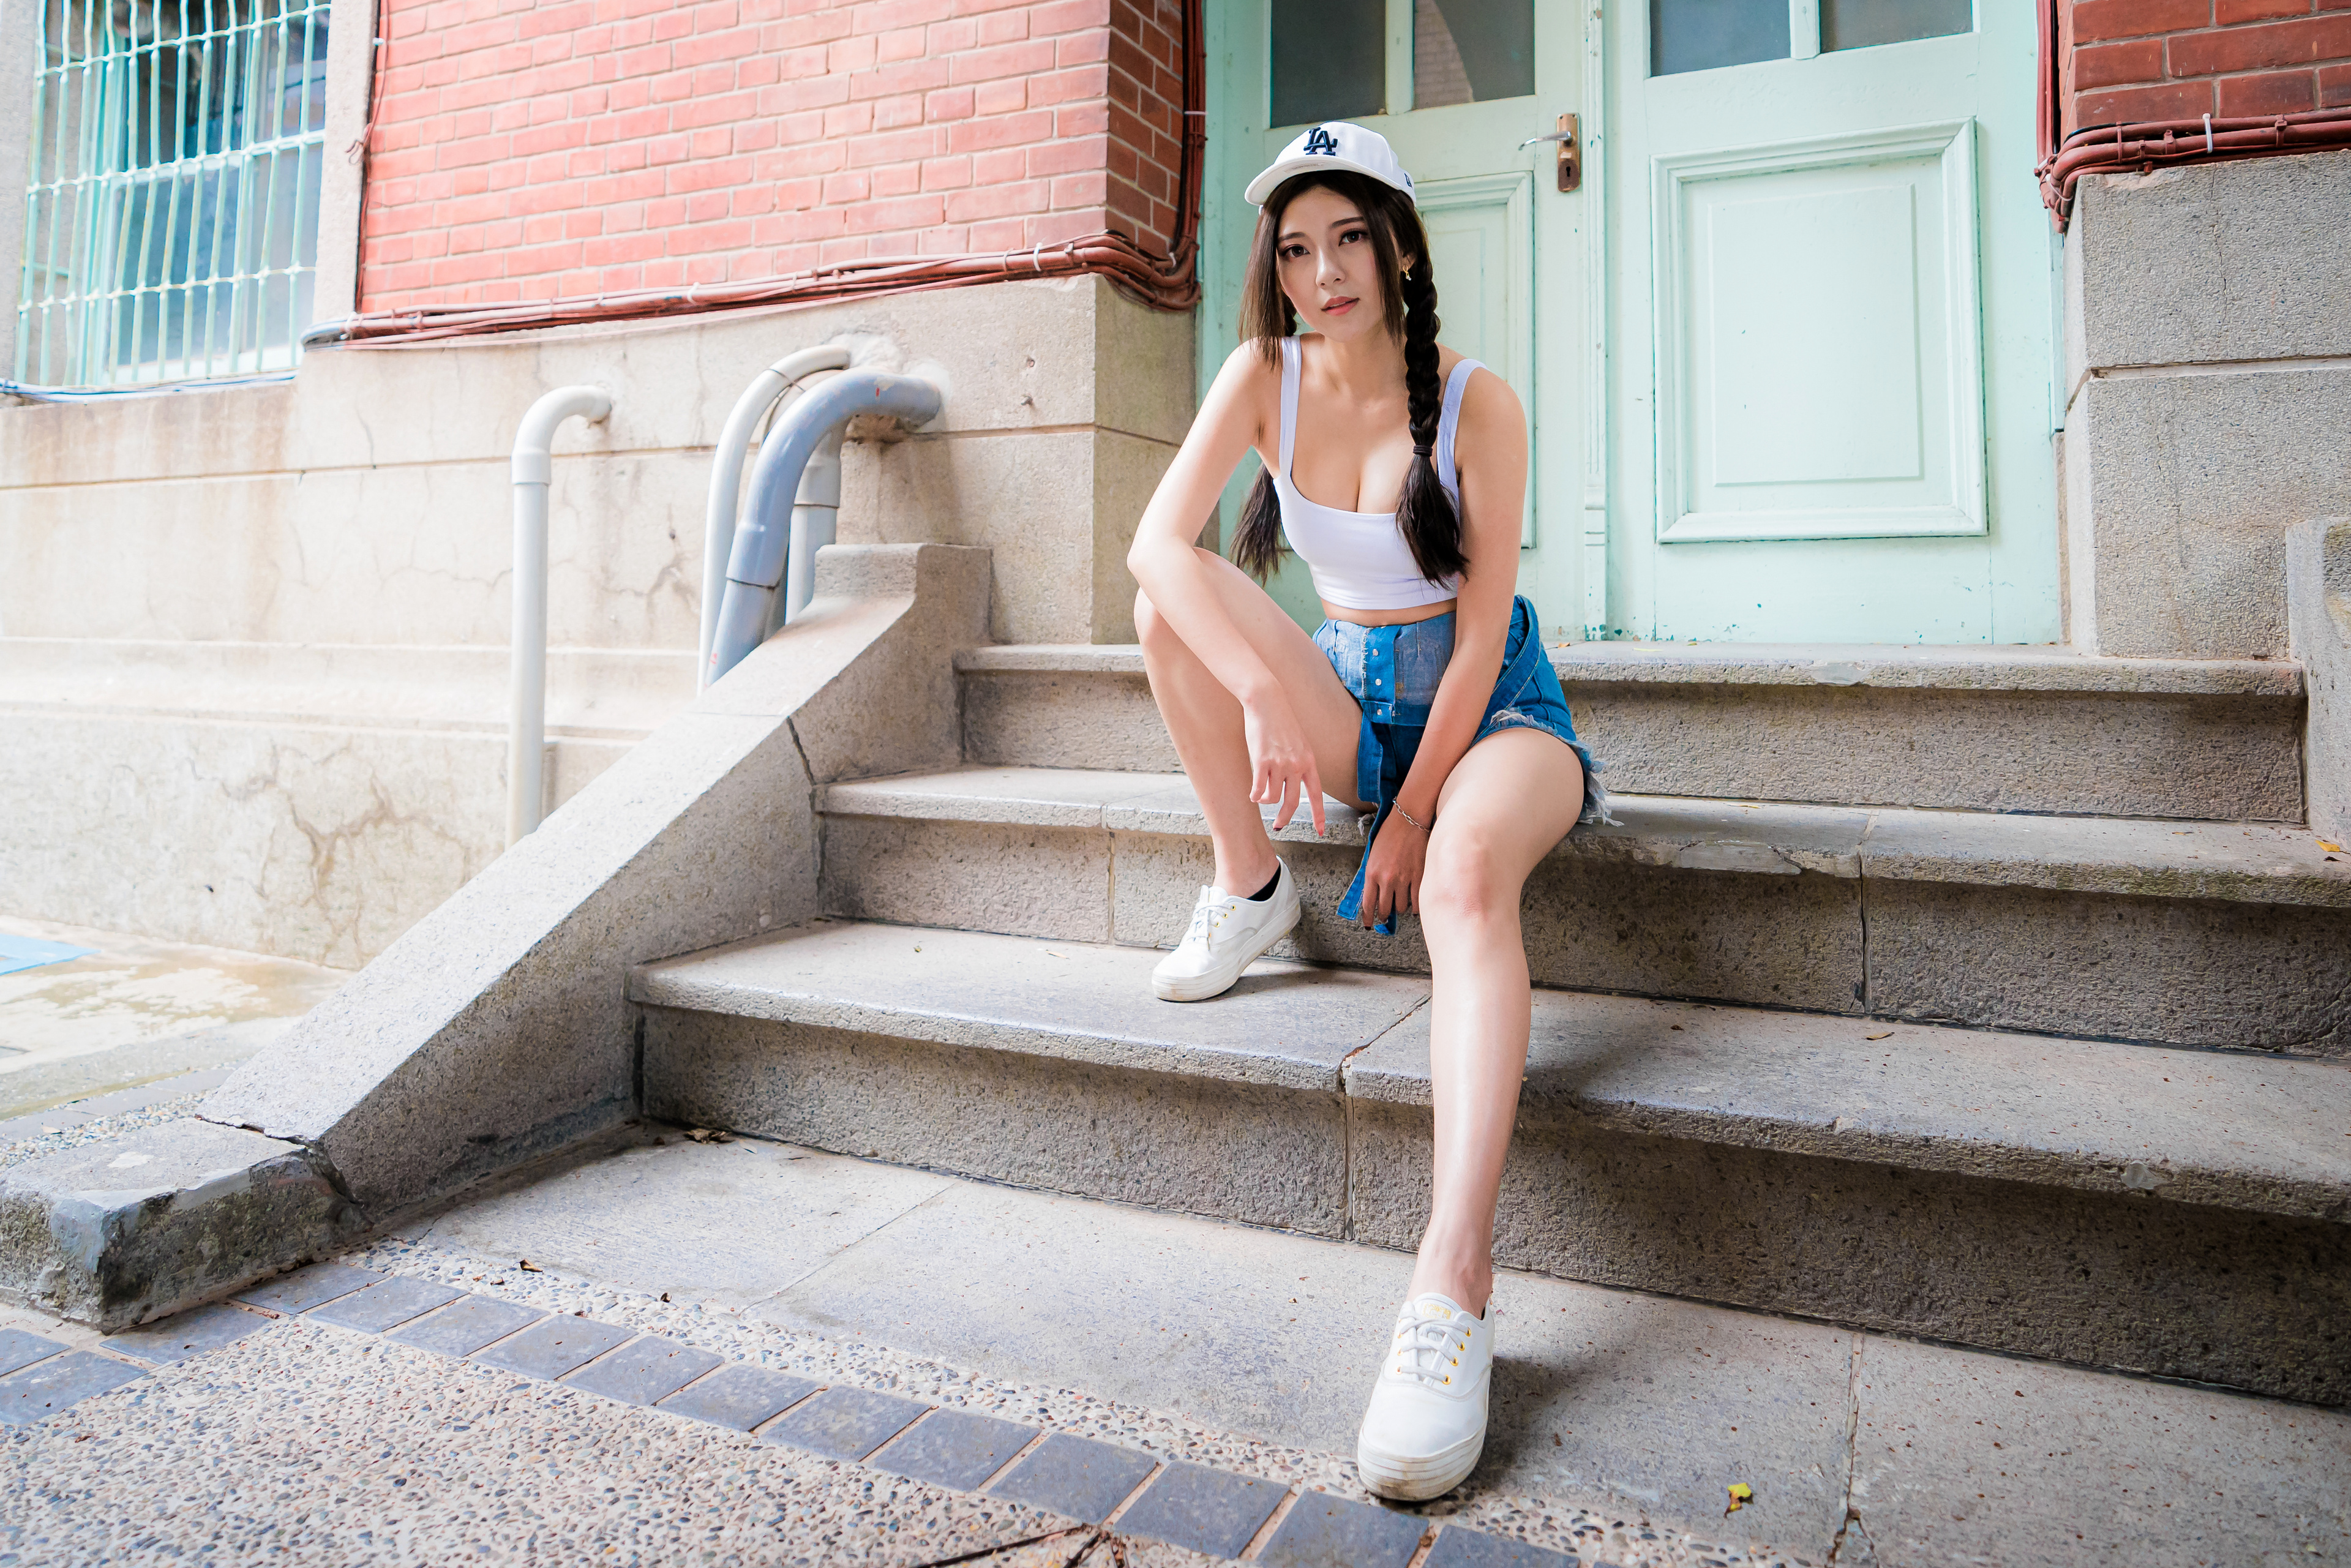 Asian Model Women Long Hair Dark Hair Twintails Sitting Stairs Pipes White Shoes White Tops Baseball 3840x2561